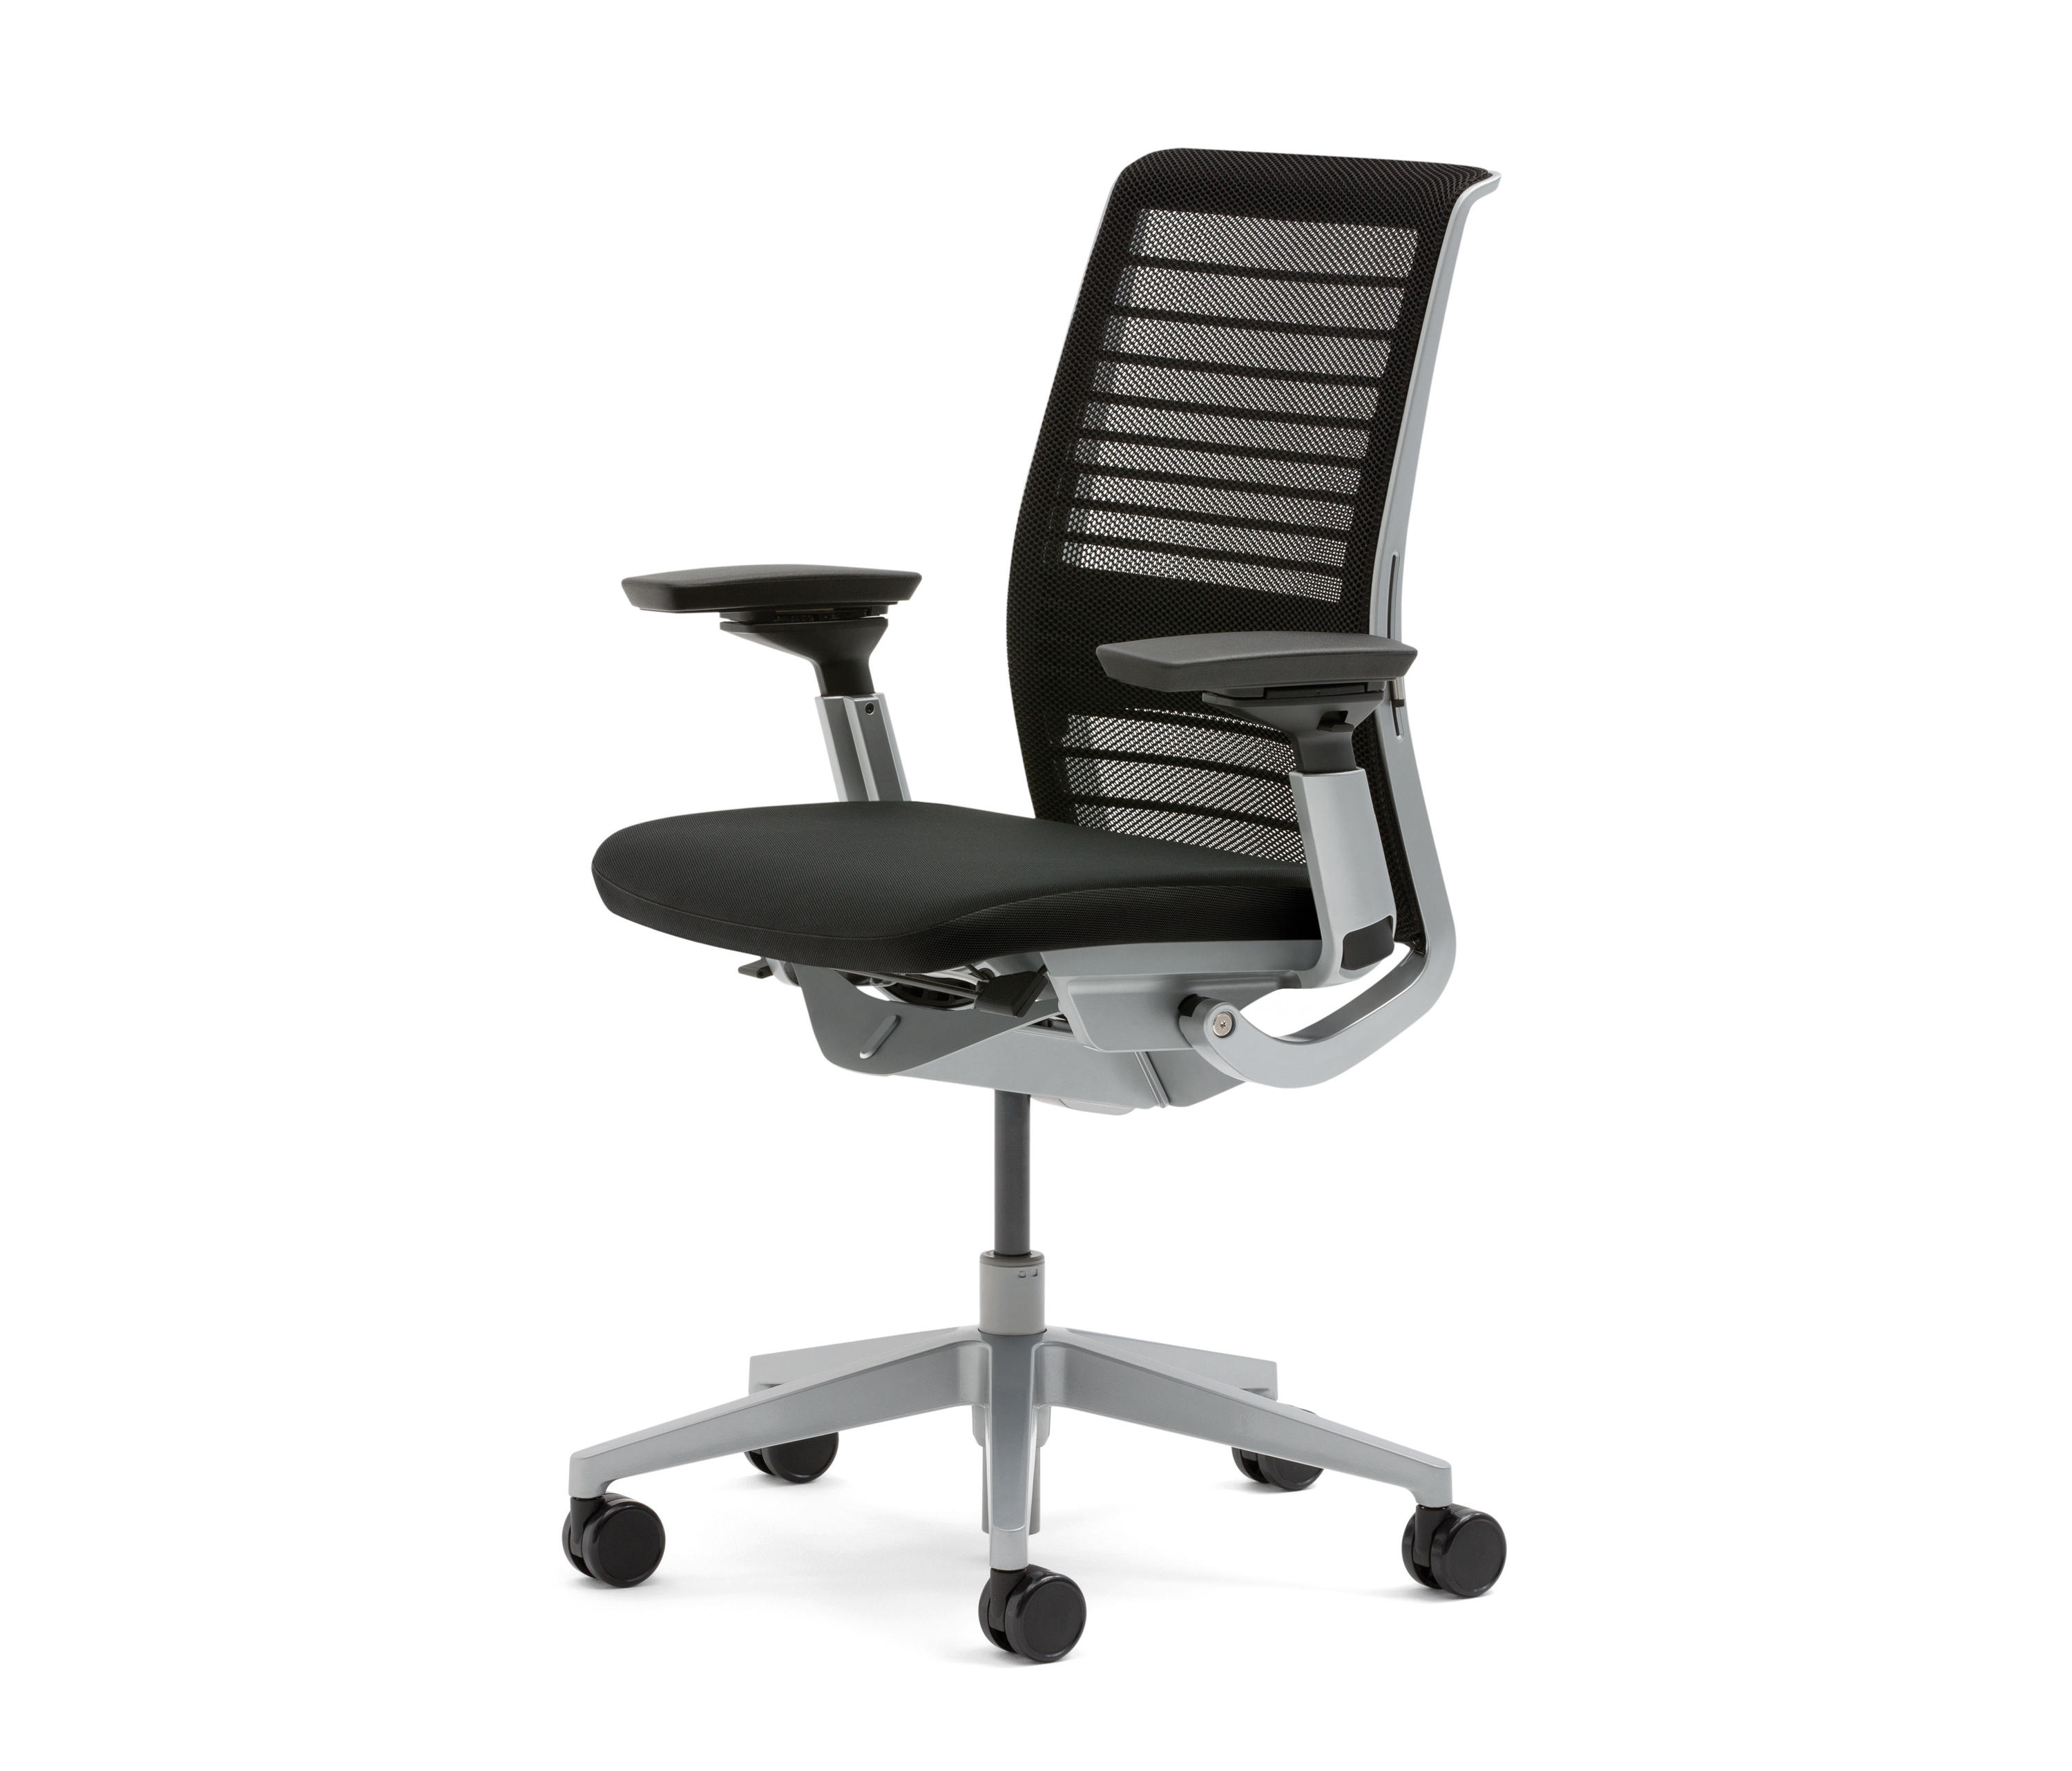 Steelcase Think Chair Review - www.inf-inet.com